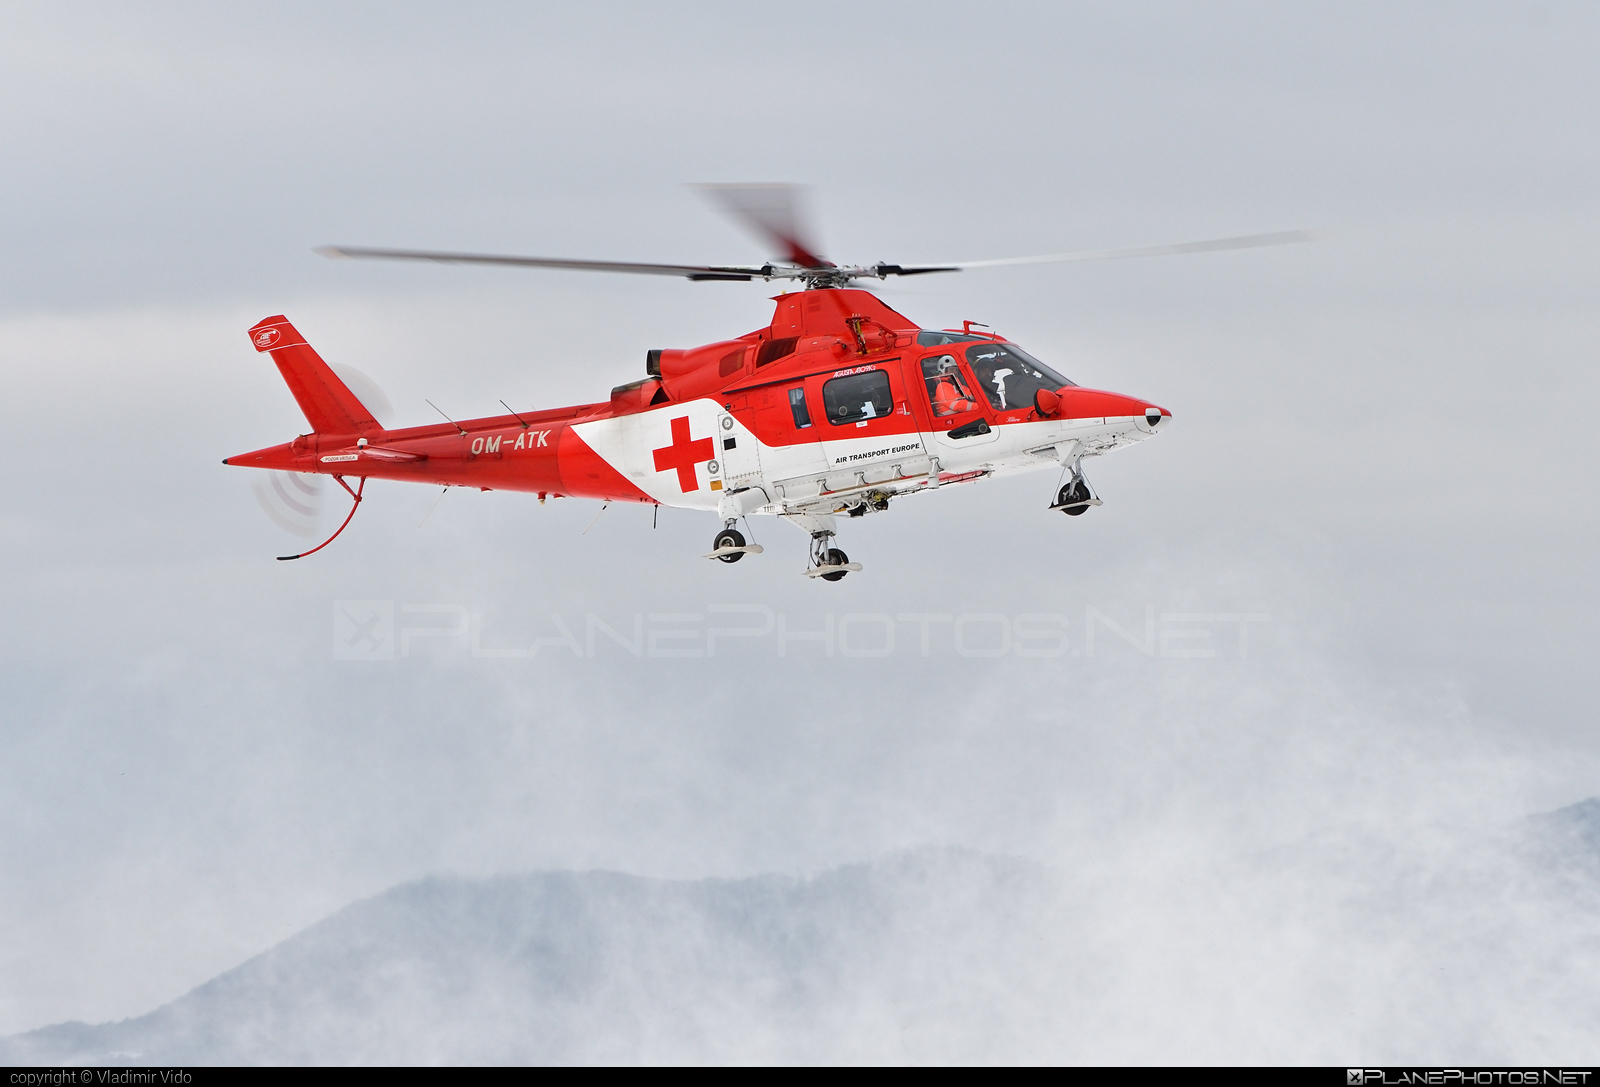 Agusta A109K2 - OM-ATK operated by Air Transport Europe #a109 #a109k2 #agusta #agusta109 #agustaa109 #agustaa109k2 #airtransporteurope